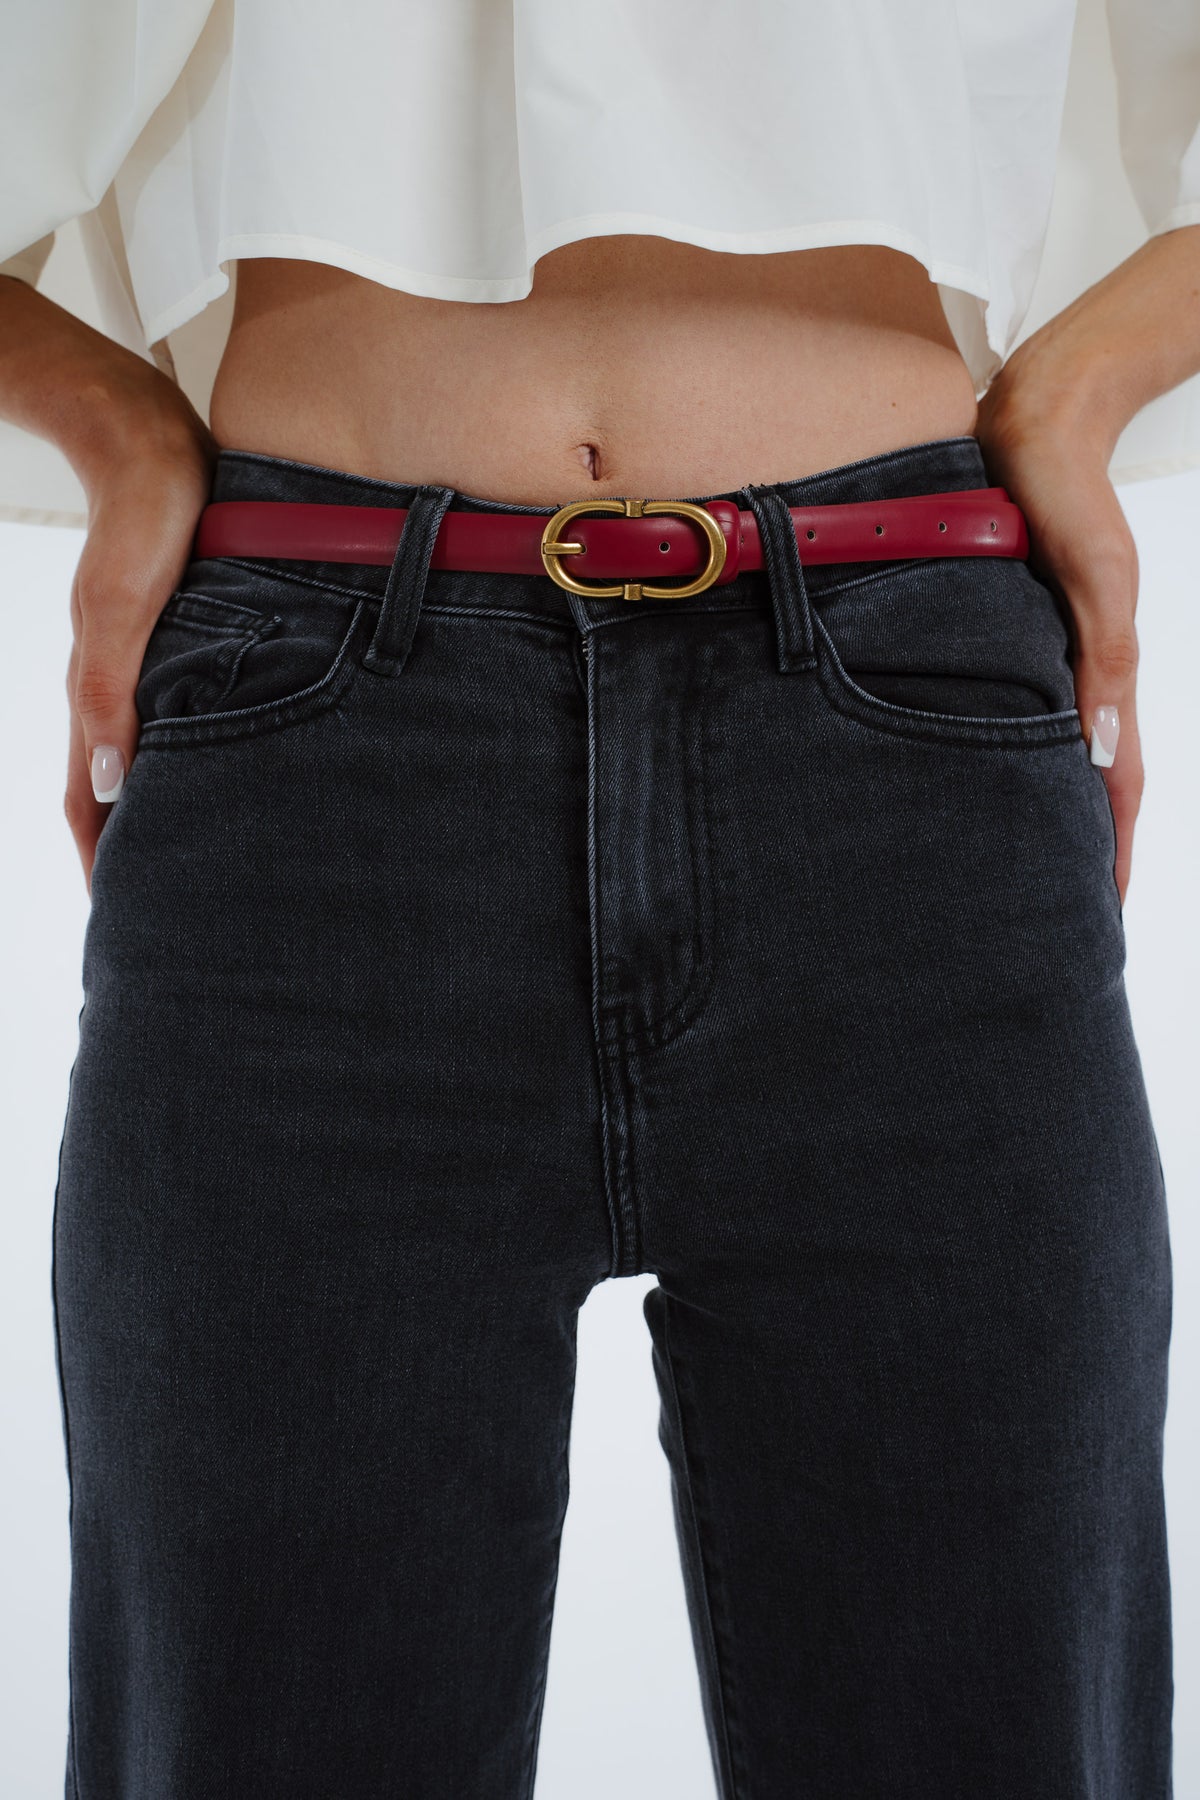 Polly Oval Buckle Belt In Red